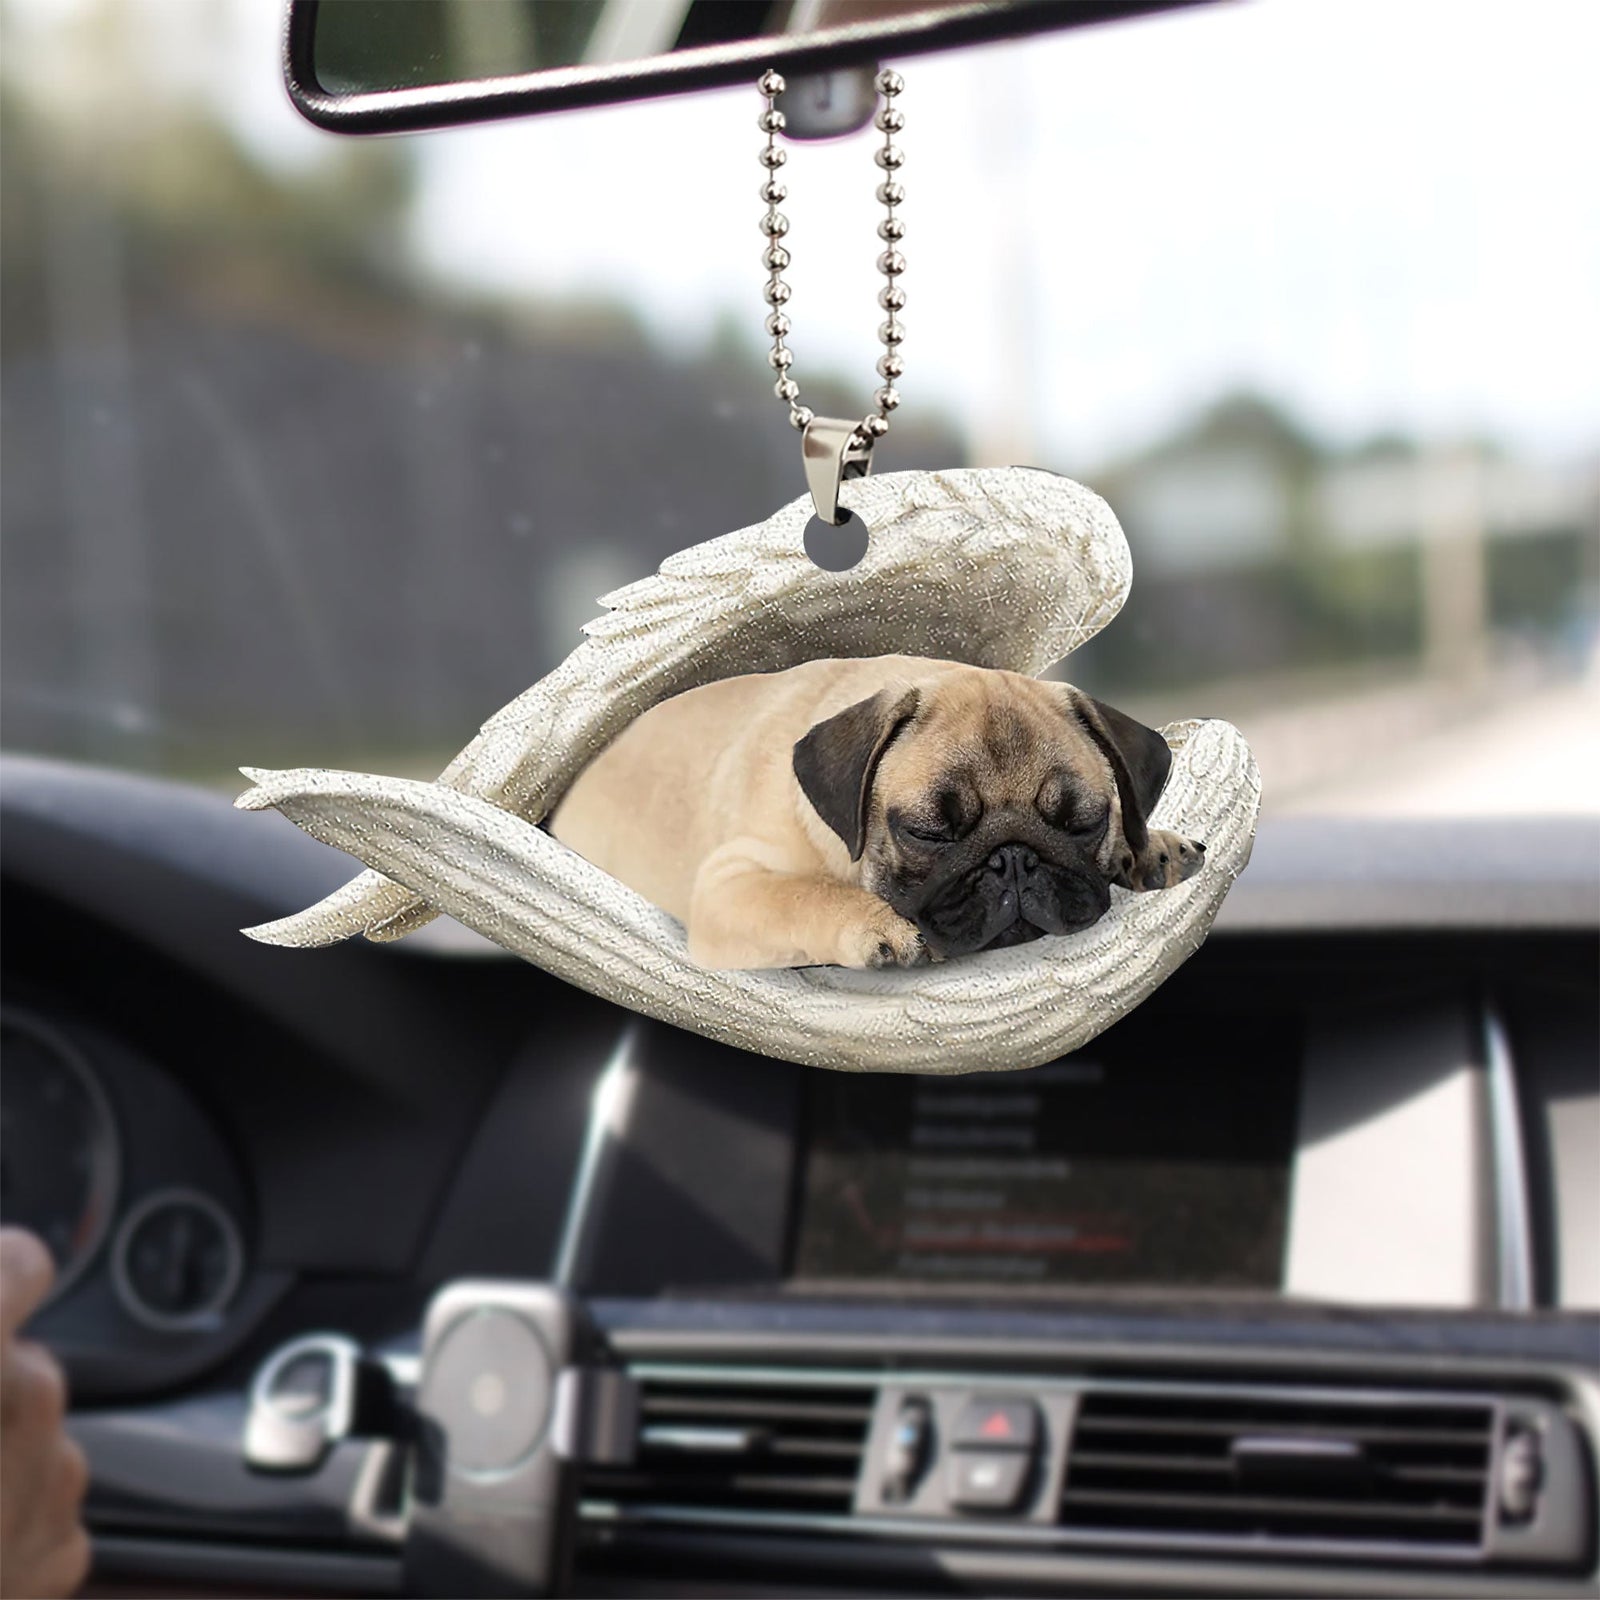 Pug Roses and Jesus Ornament - Dog Car Hanging Ornament - Gift For Pet -  Cerigifts